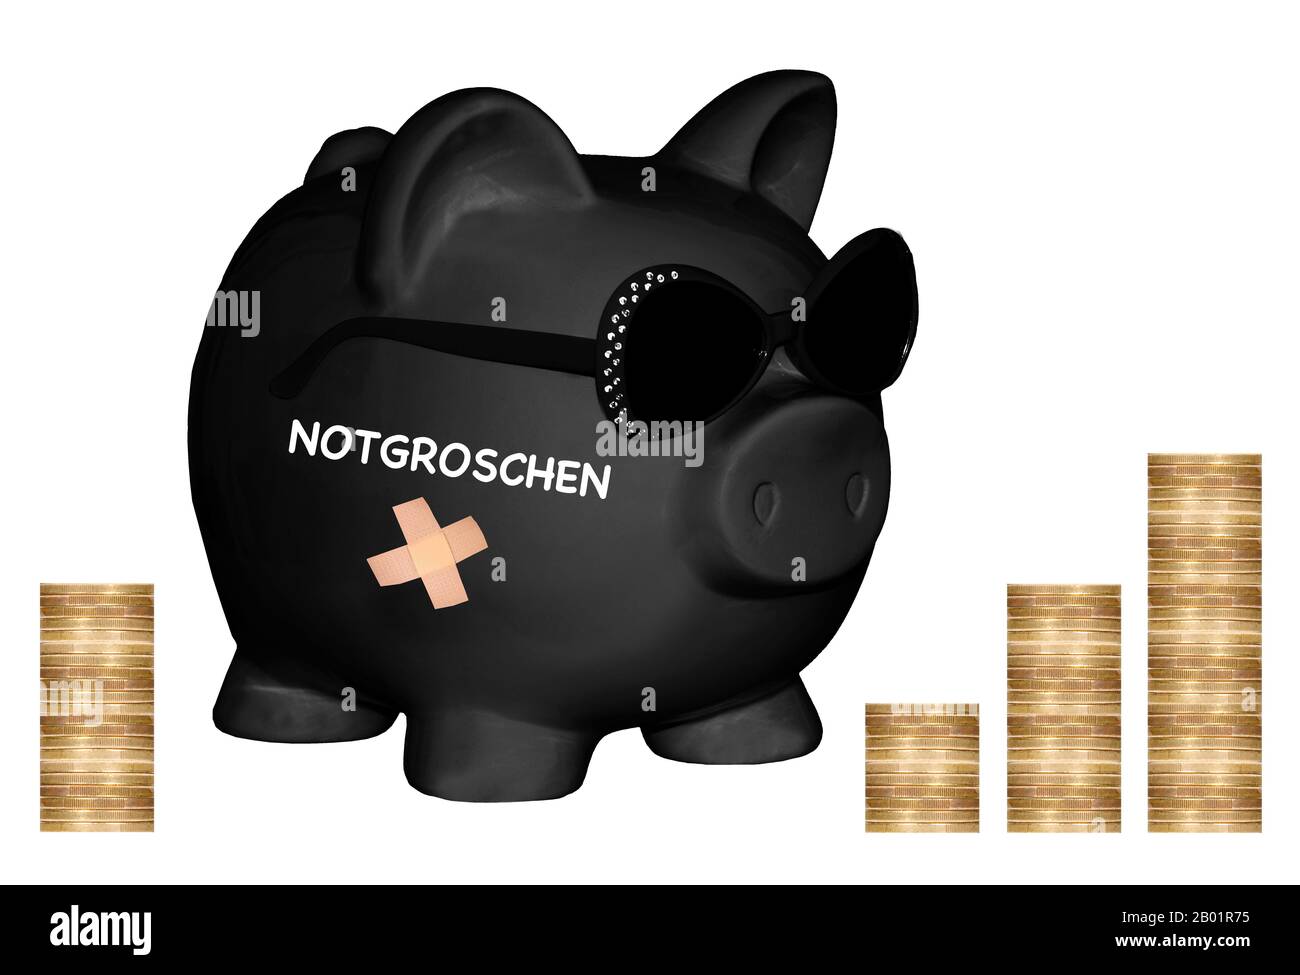 , black piggy bank with sunglasses and lettering Notgroschen, nest egg, coin piles in background, composing Stock Photo